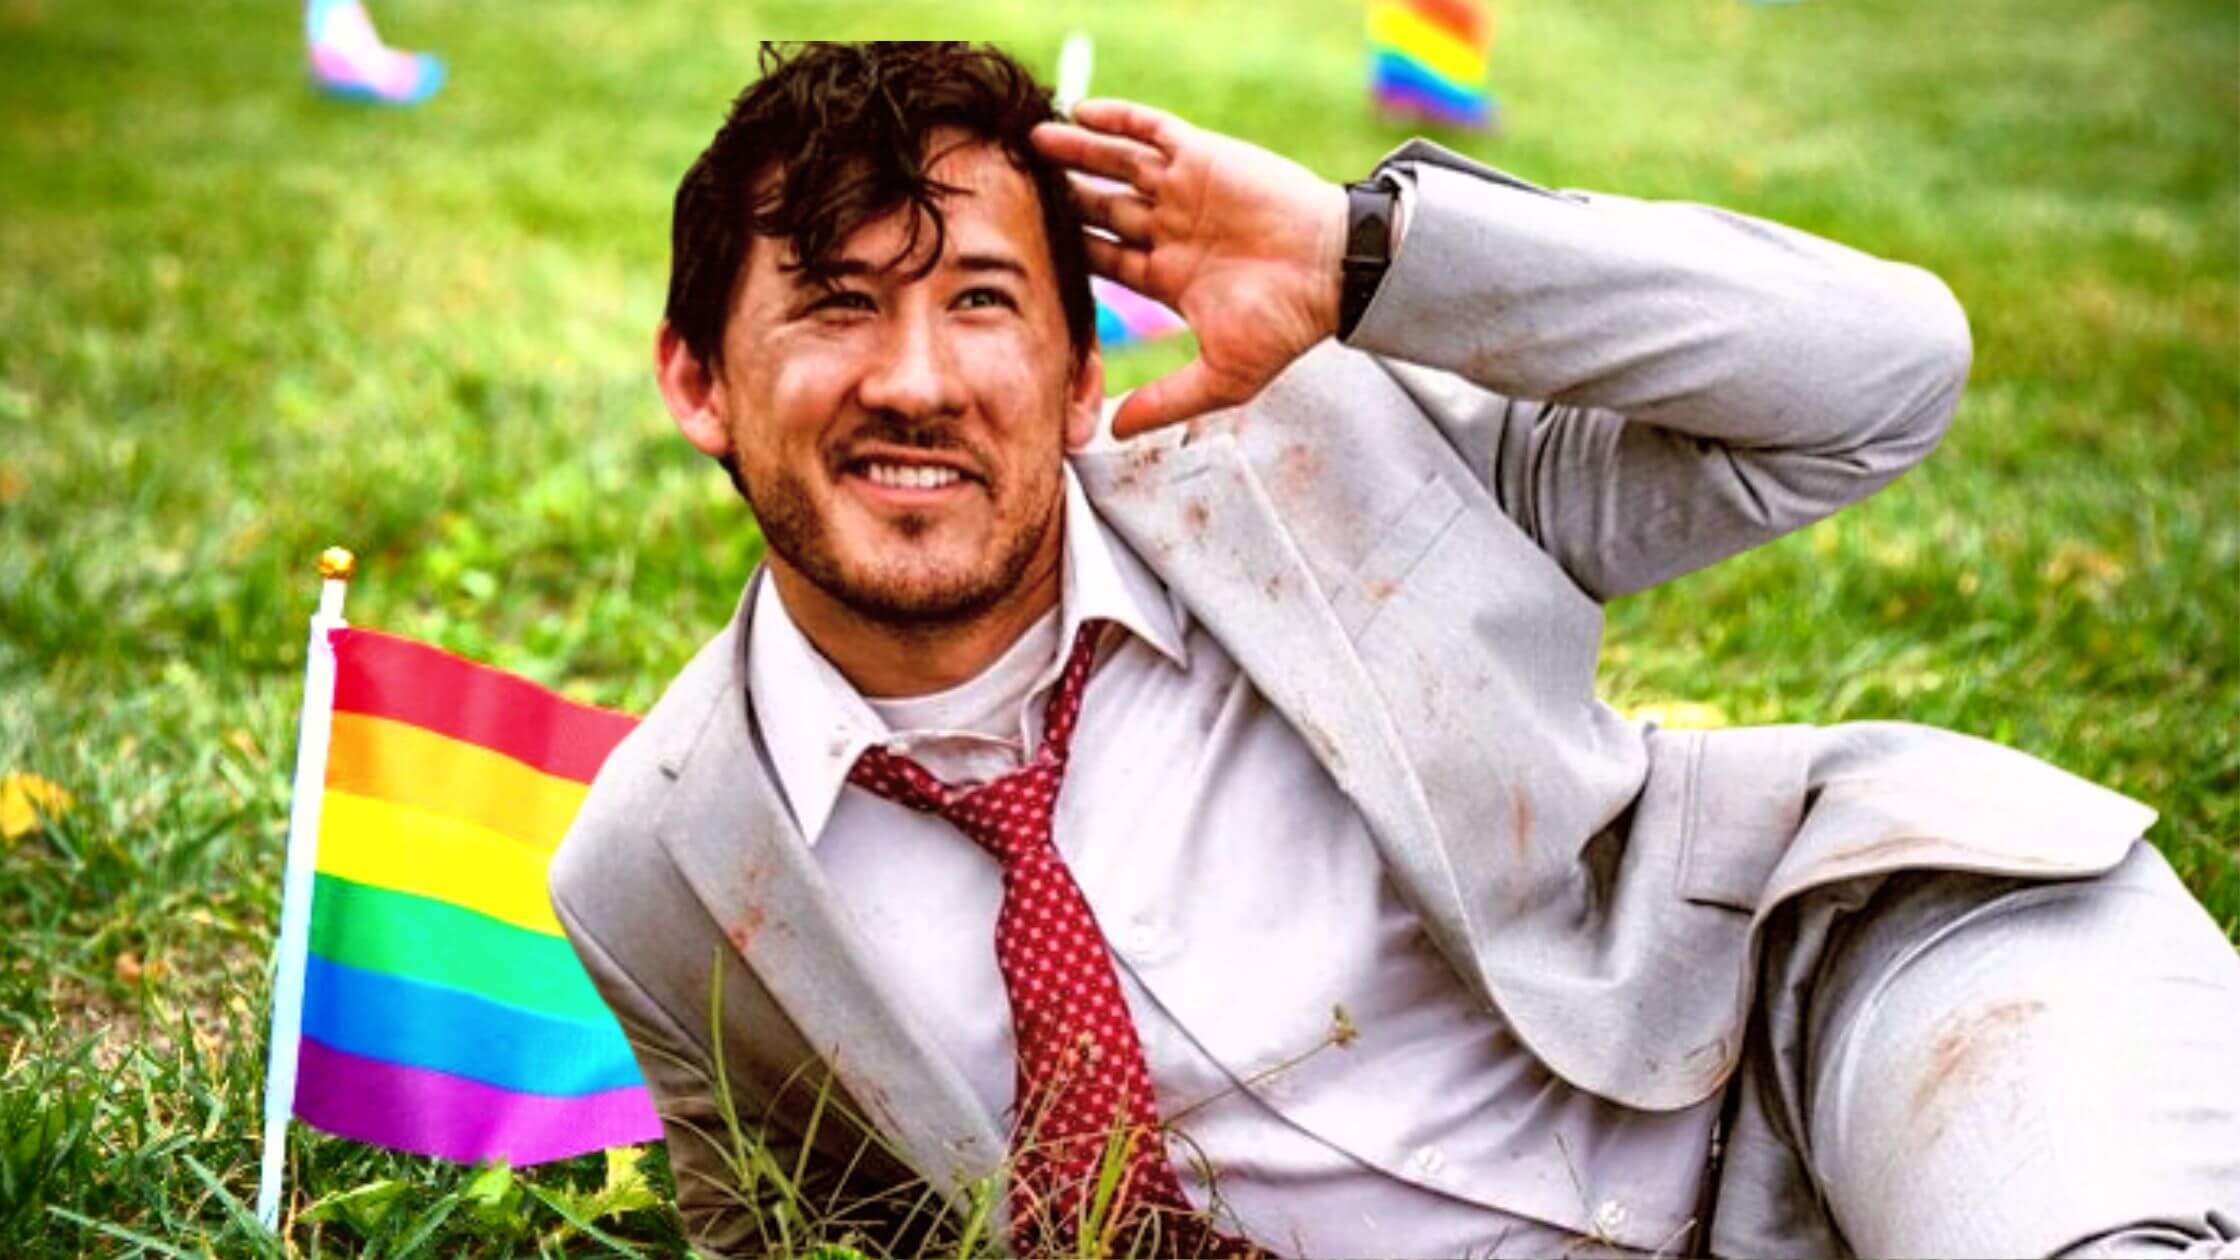 Is Markiplier Gay Let's Find Out More About Him